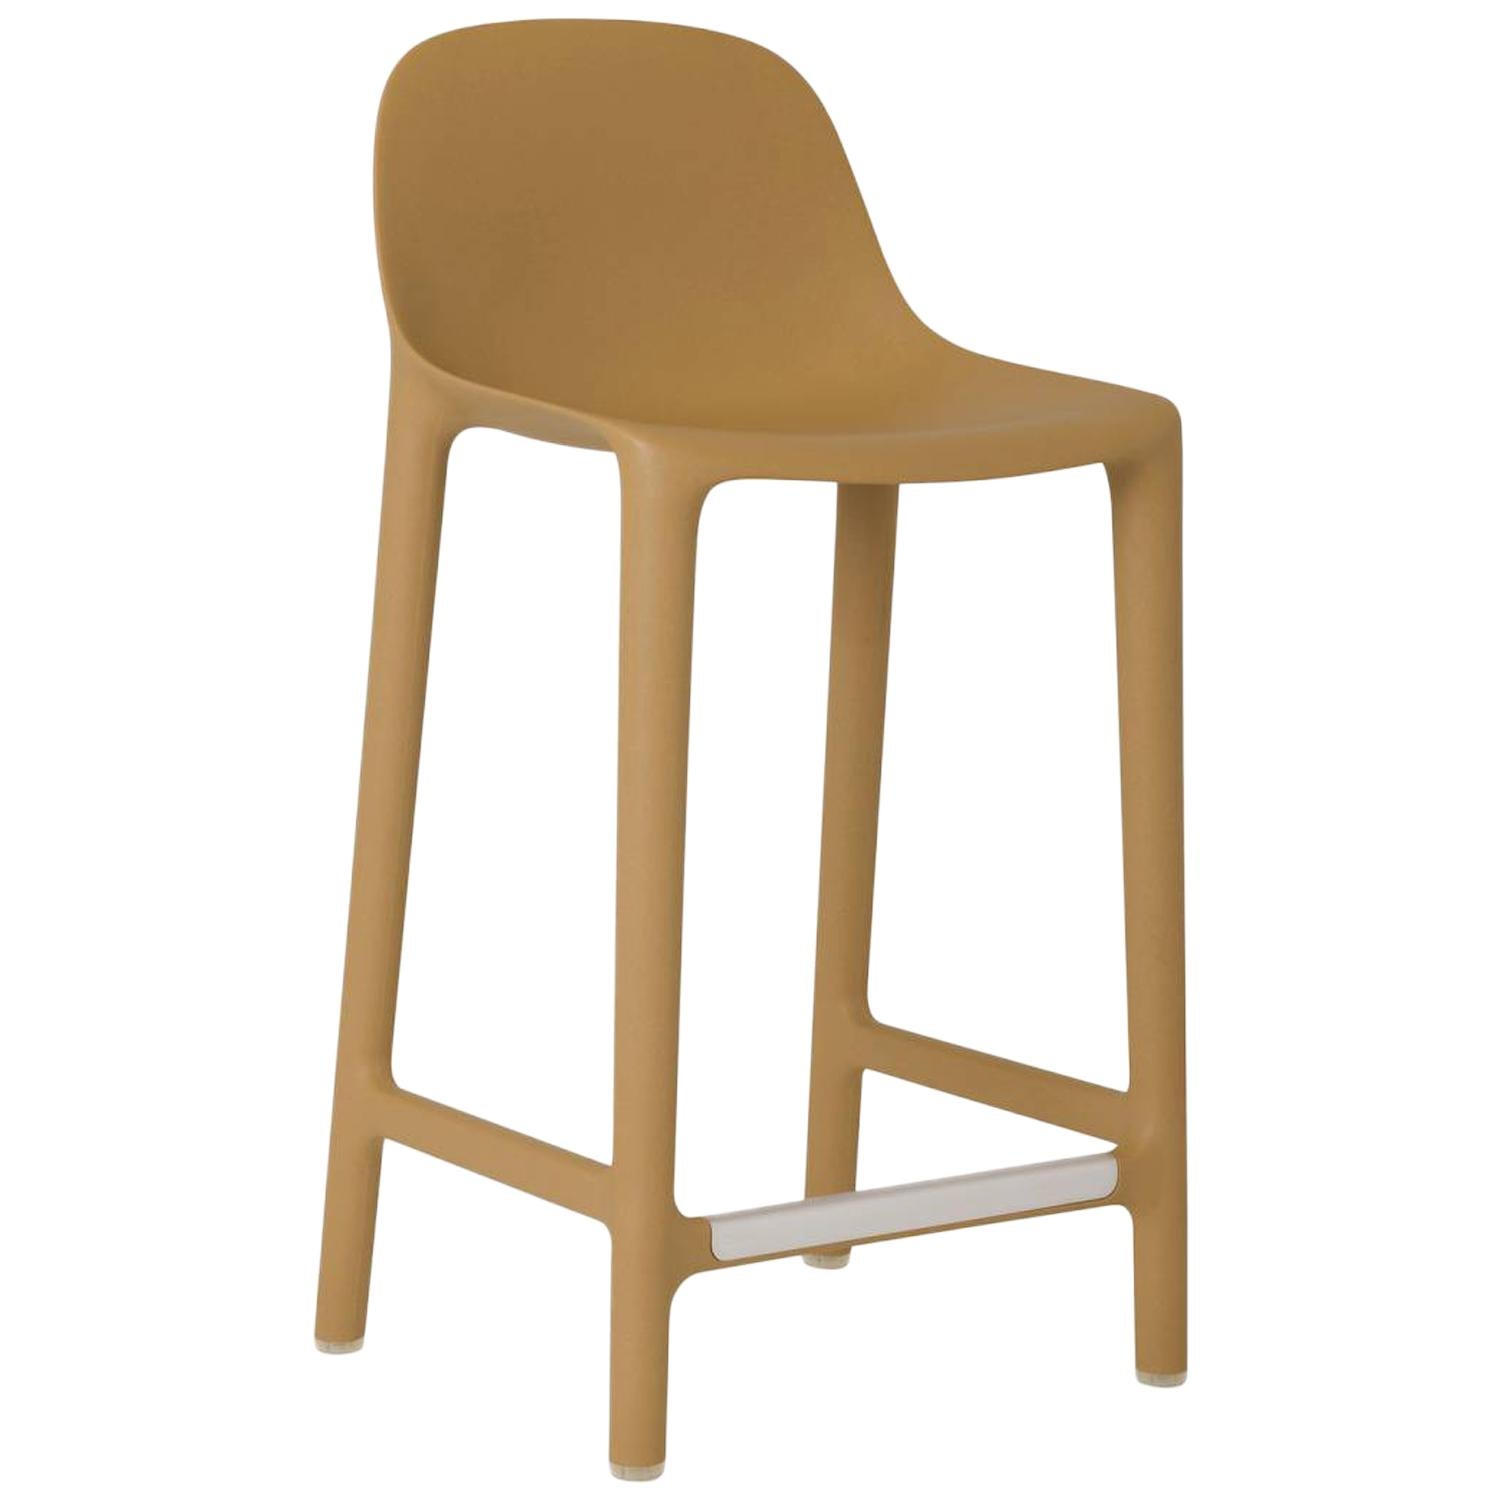 Emeco Broom Counter Stool in Tan by Philippe Starck